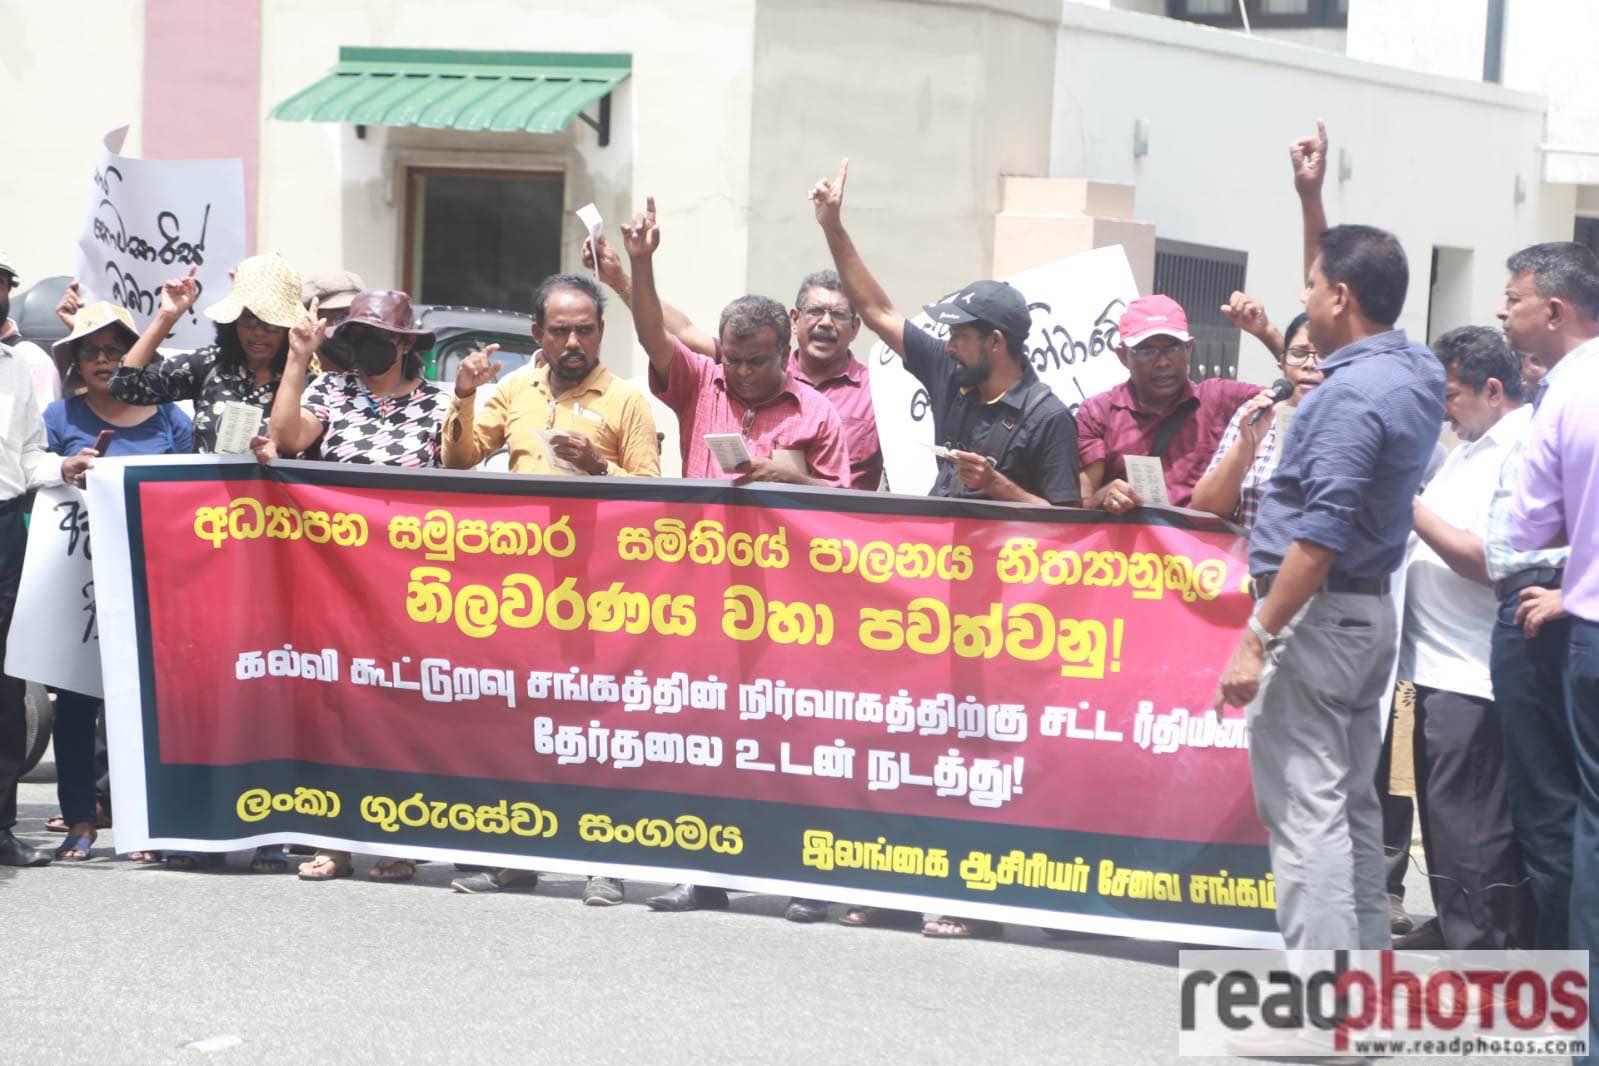 Ceylon Teachers Service Union protests against the Education Cooperative Society